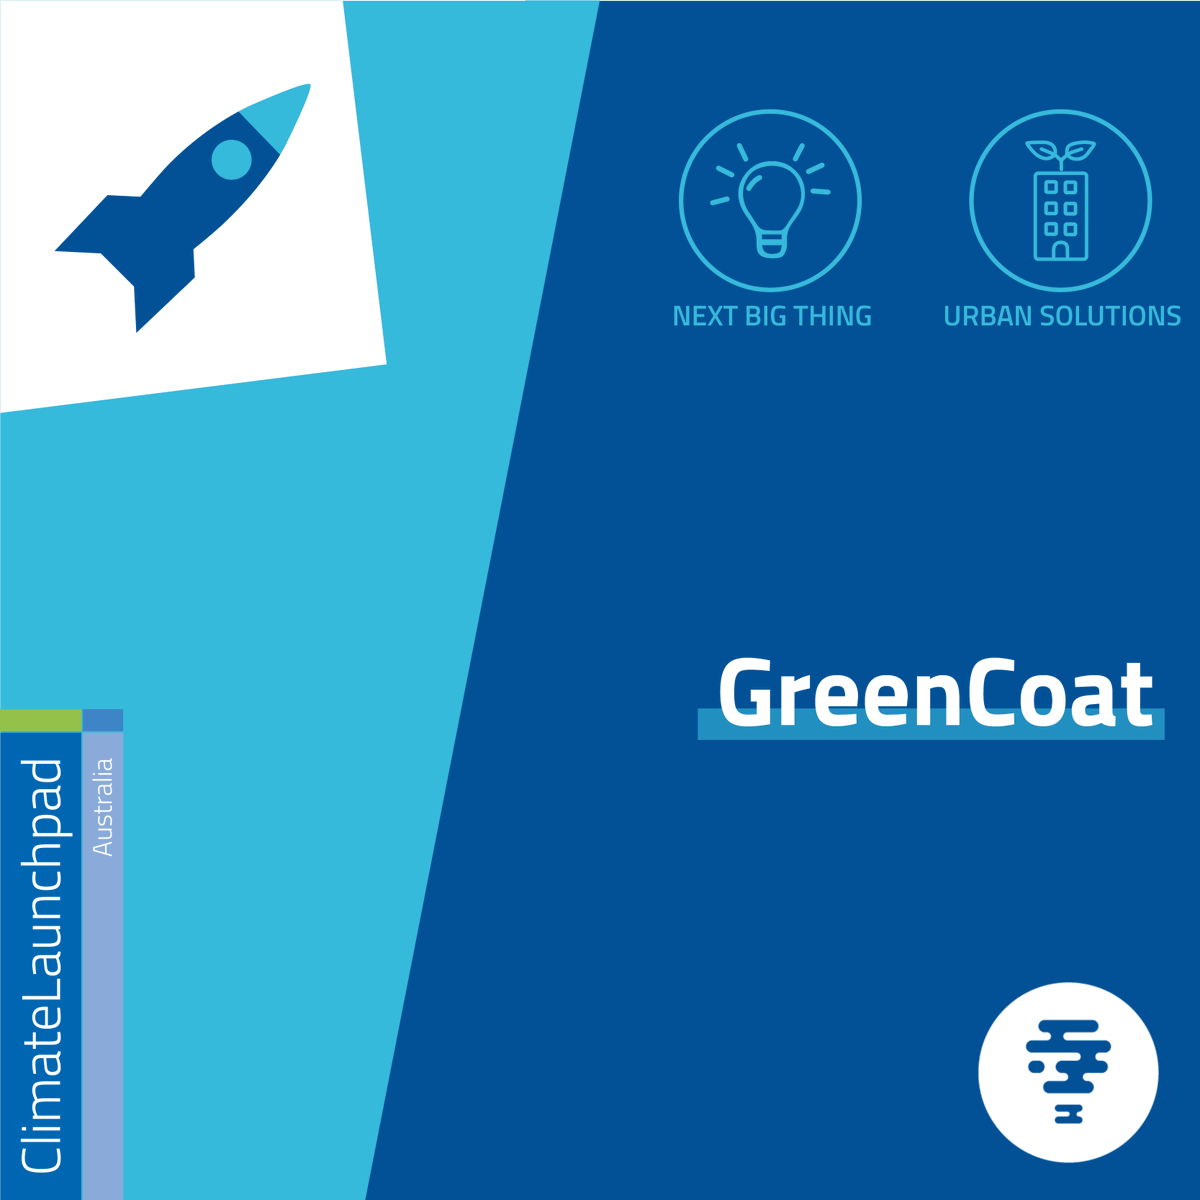 We are delighted to introduce our @ClimateLaunch 2023 Australian Finalists! GreenCoat is developing a next-generation plasma coating for windows to dramatically improve buildings' energy efficiency. Watch our #CLP23 National Finals @ NEXUS! victoriancleantech.org.au/nexus